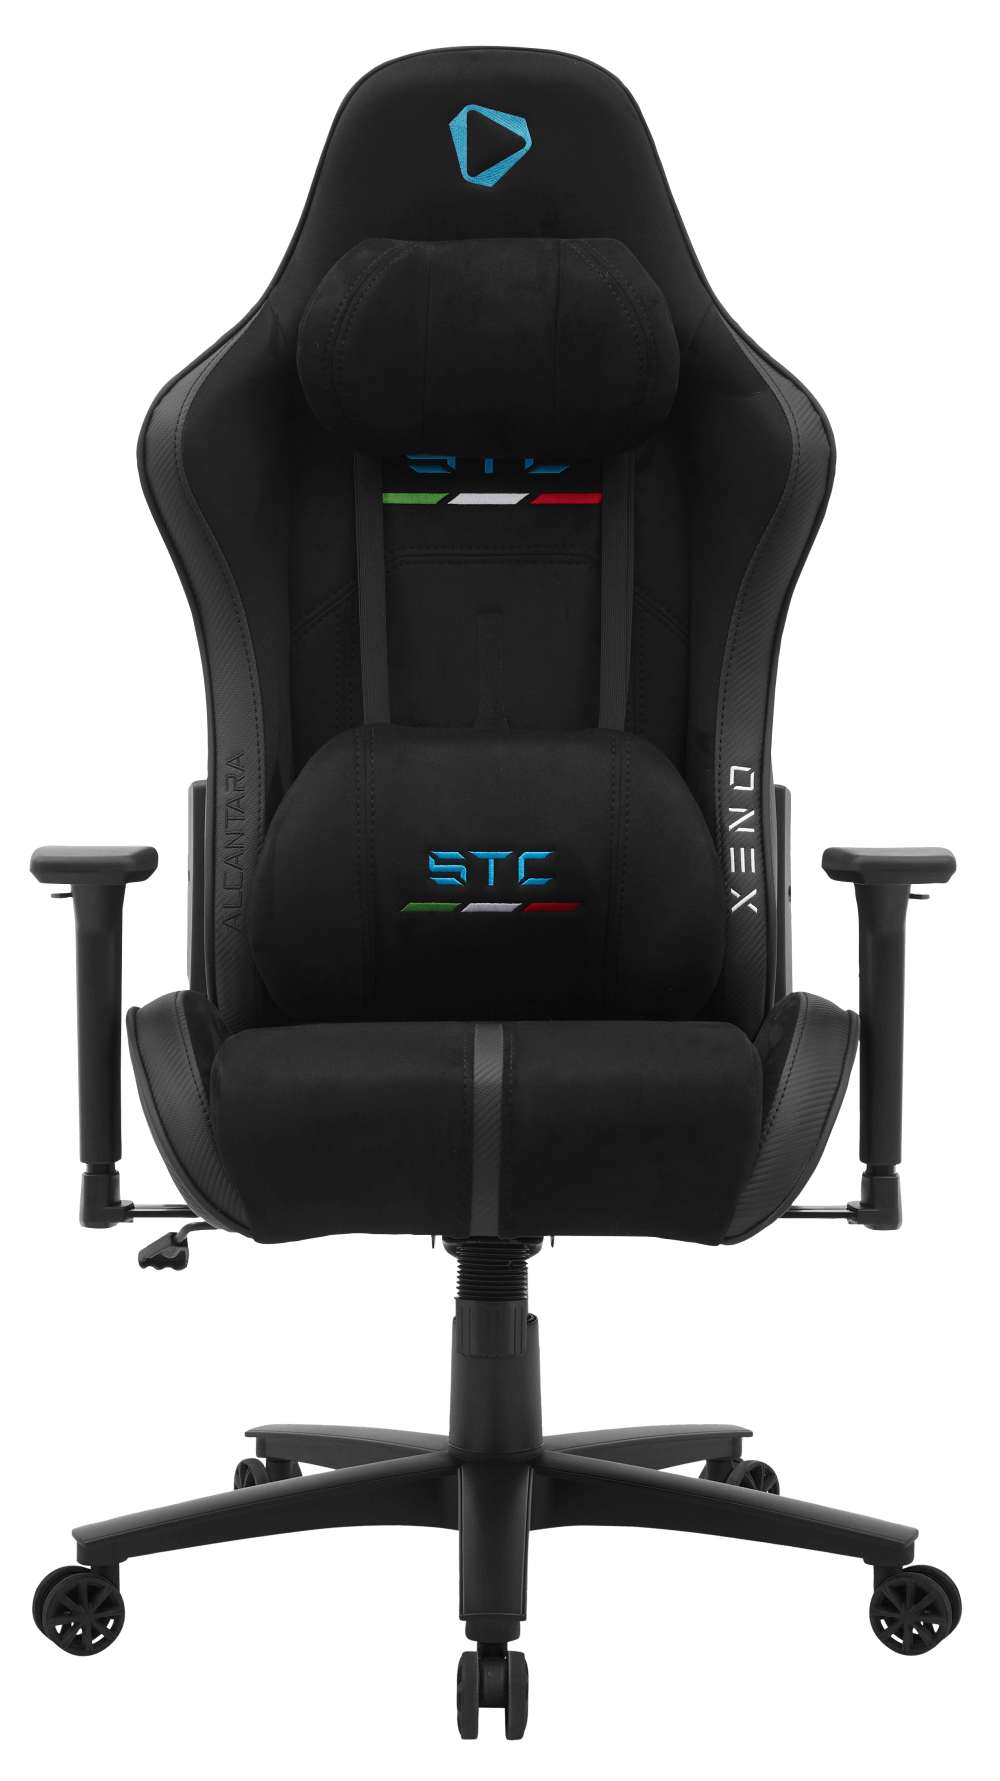  ONEX-STC ALCANTARA Gaming /Office Chair - Black<BR><fONT COLOR='RED'>In-Store Pickup Not Available - Delivery Only (Freight Charges Apply)  